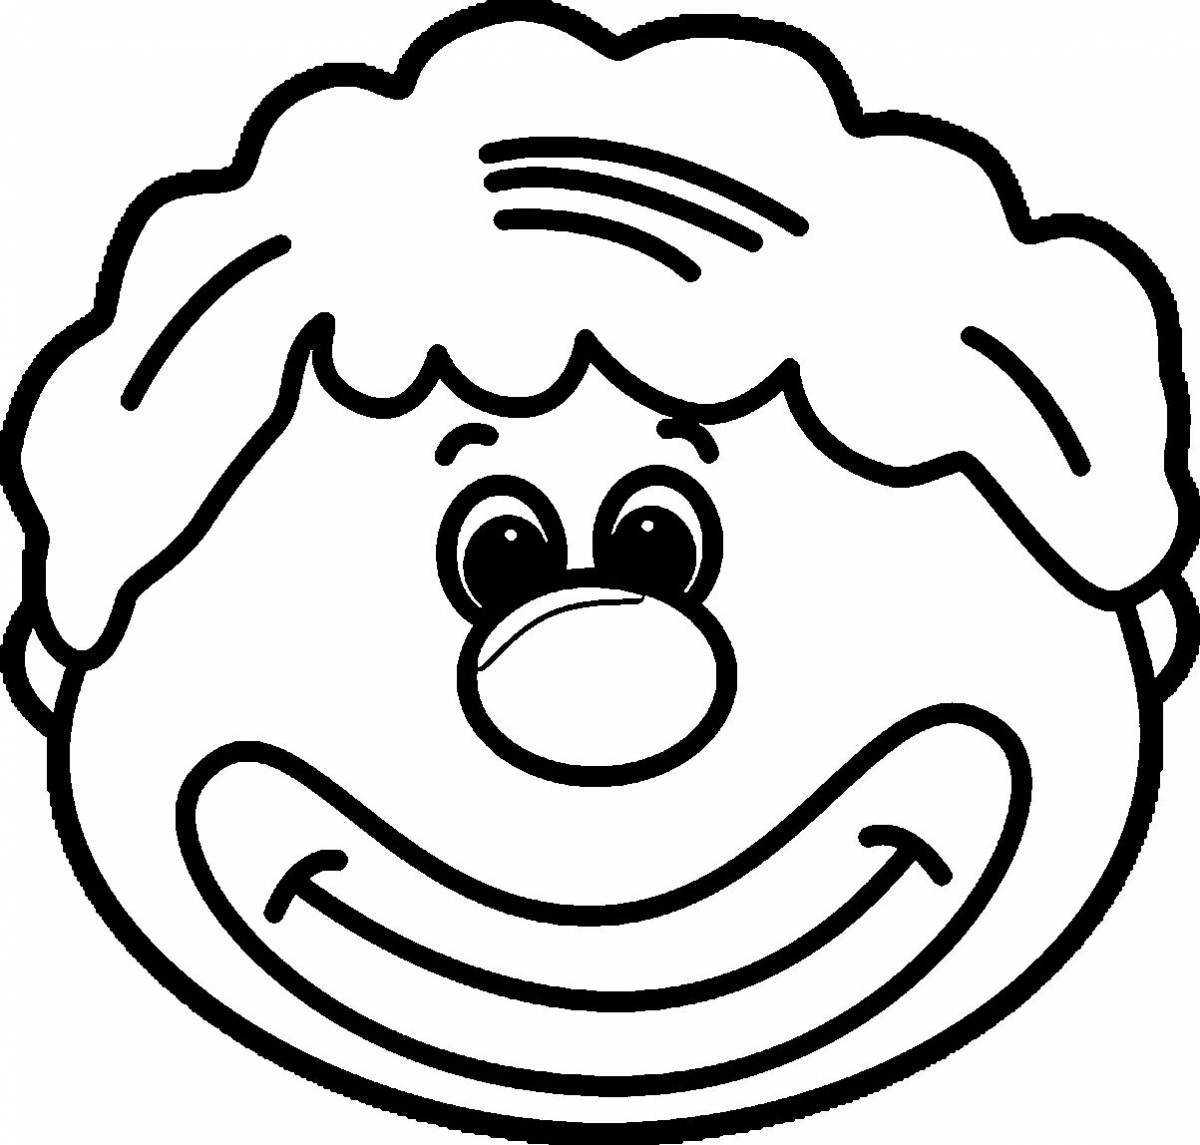 Magic clown face coloring page for kids